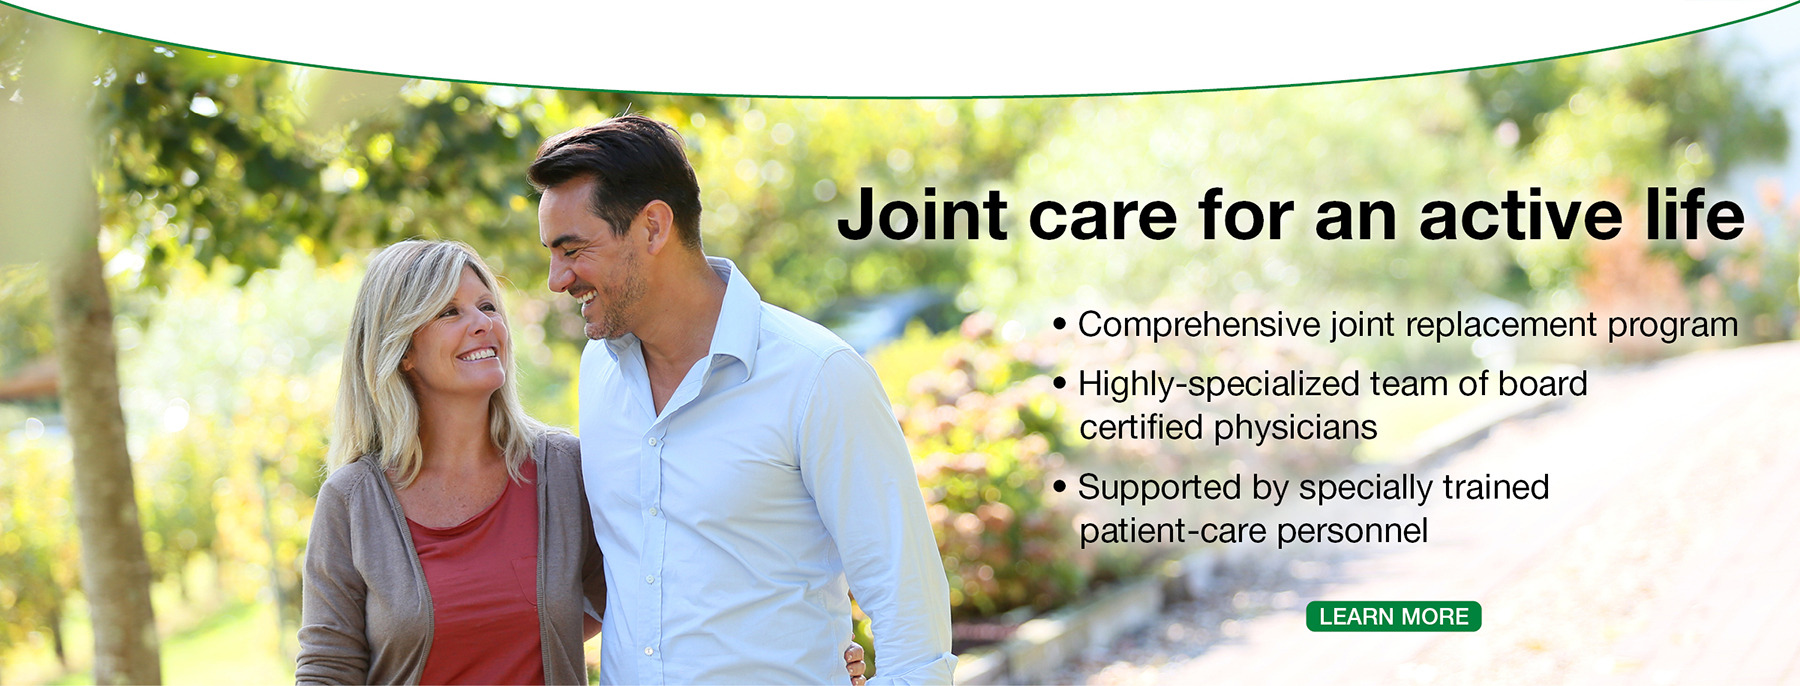 Joint Care For Active Life Web Rotator